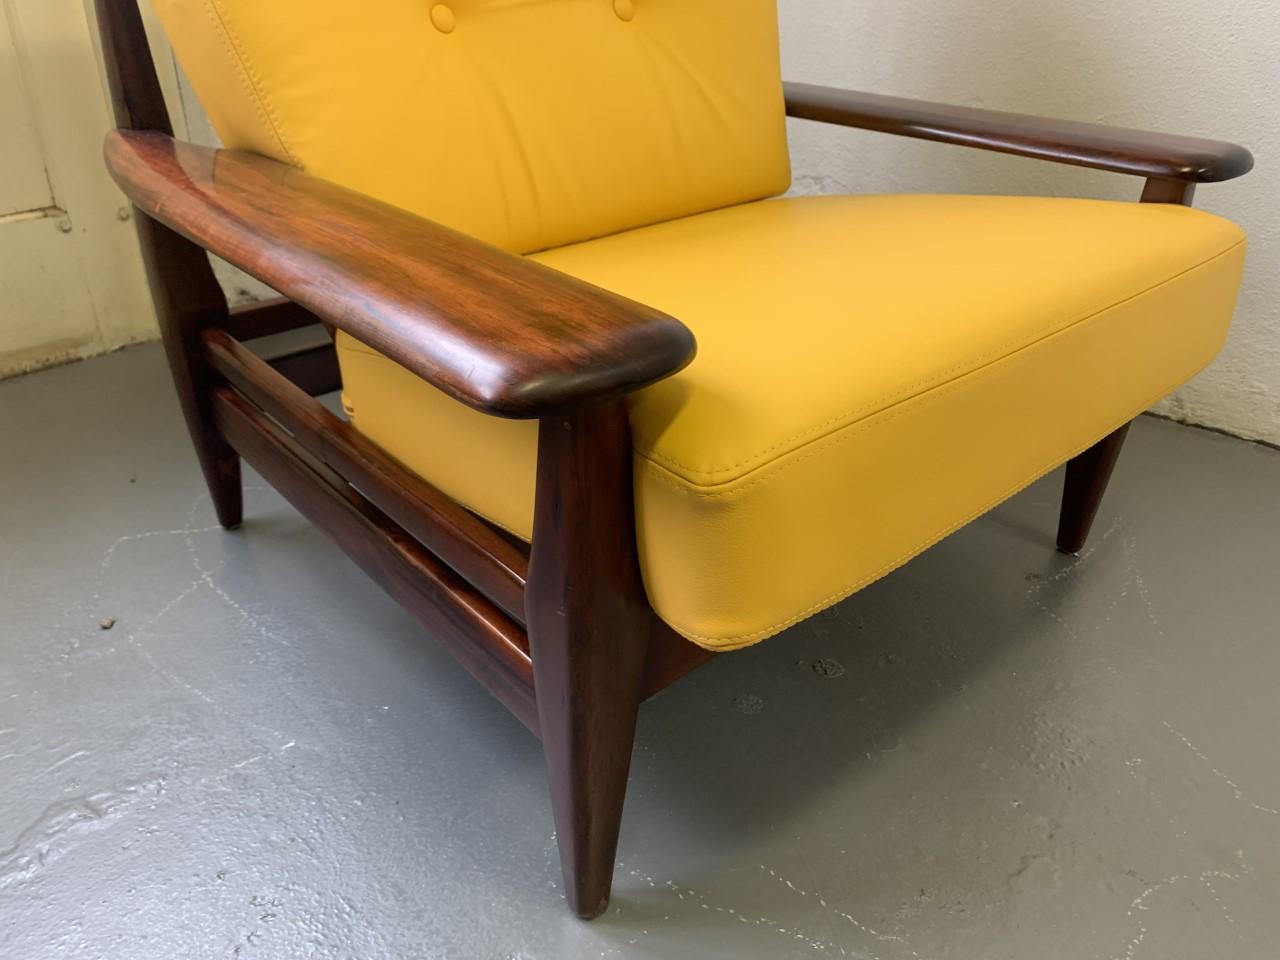 Large Brutalist Lounge chair by Brazilian designer Jean Gillon from the 1960s
In a very beautifull vintage condition.
New Premium quality leather cushions, in typical Brazilian Deep Yellow.

In the 1960s & 1970s a lot of the Brazilian Designers